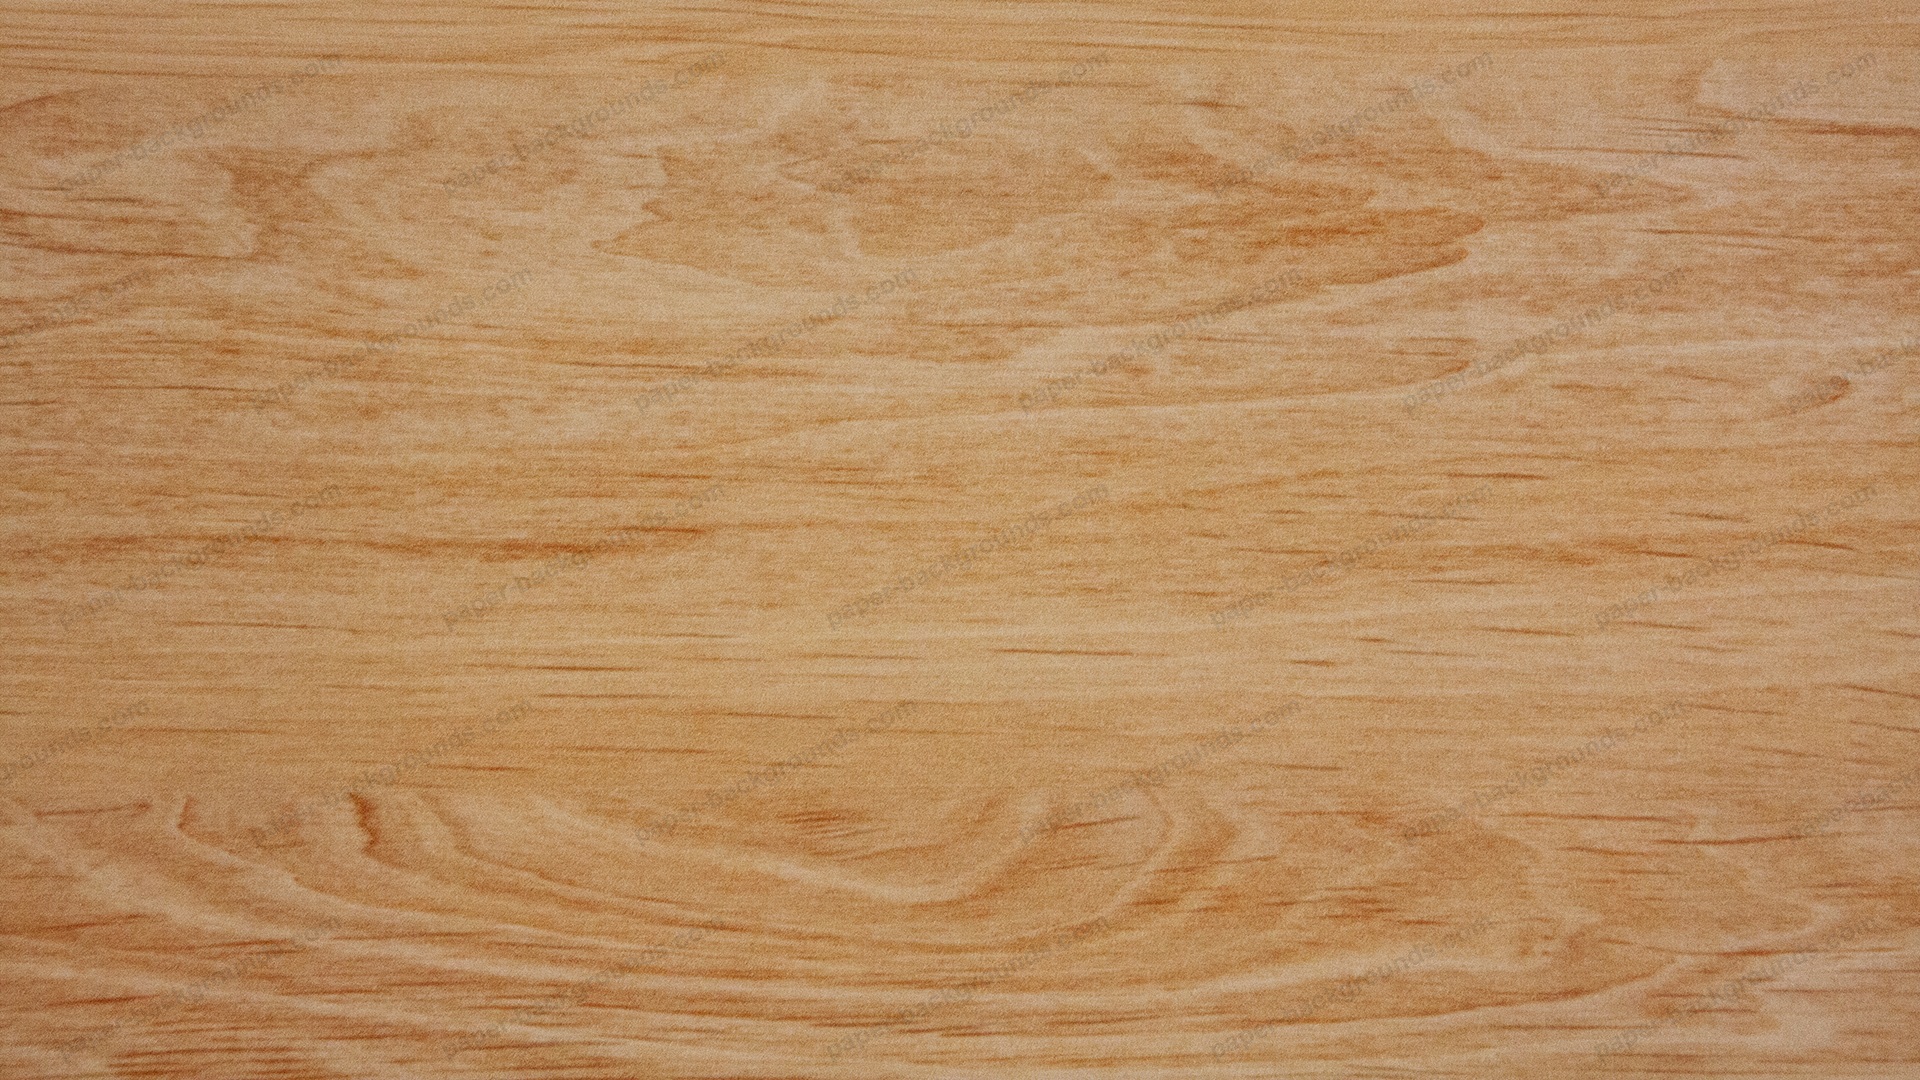 224 2248413 Table Wood Texture Hd 